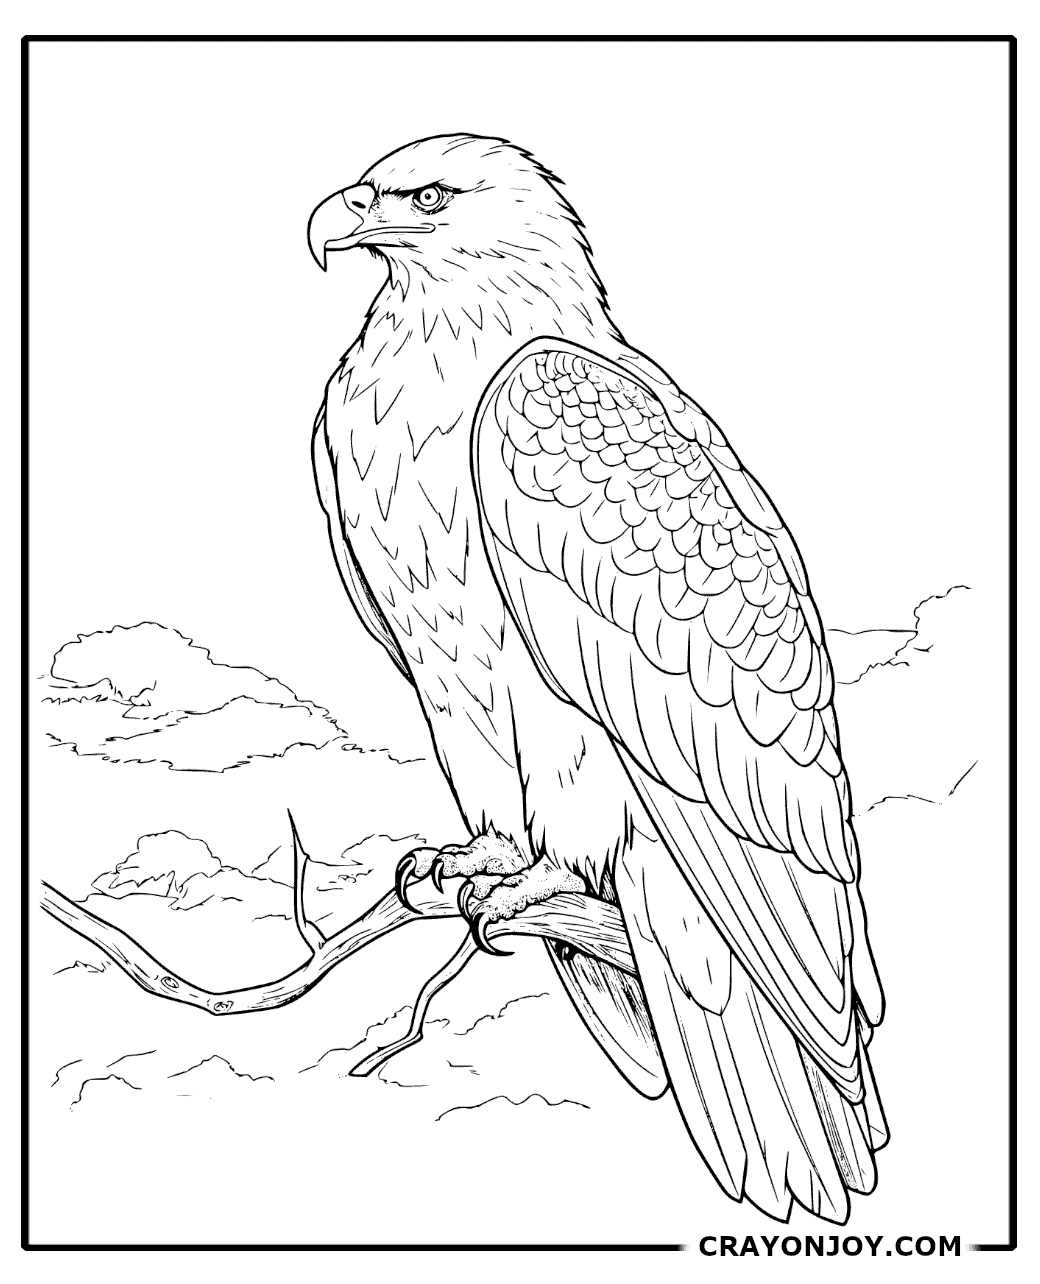 Bald Eagle Coloring Pages: Free Printable Sheets for Kids and Adults